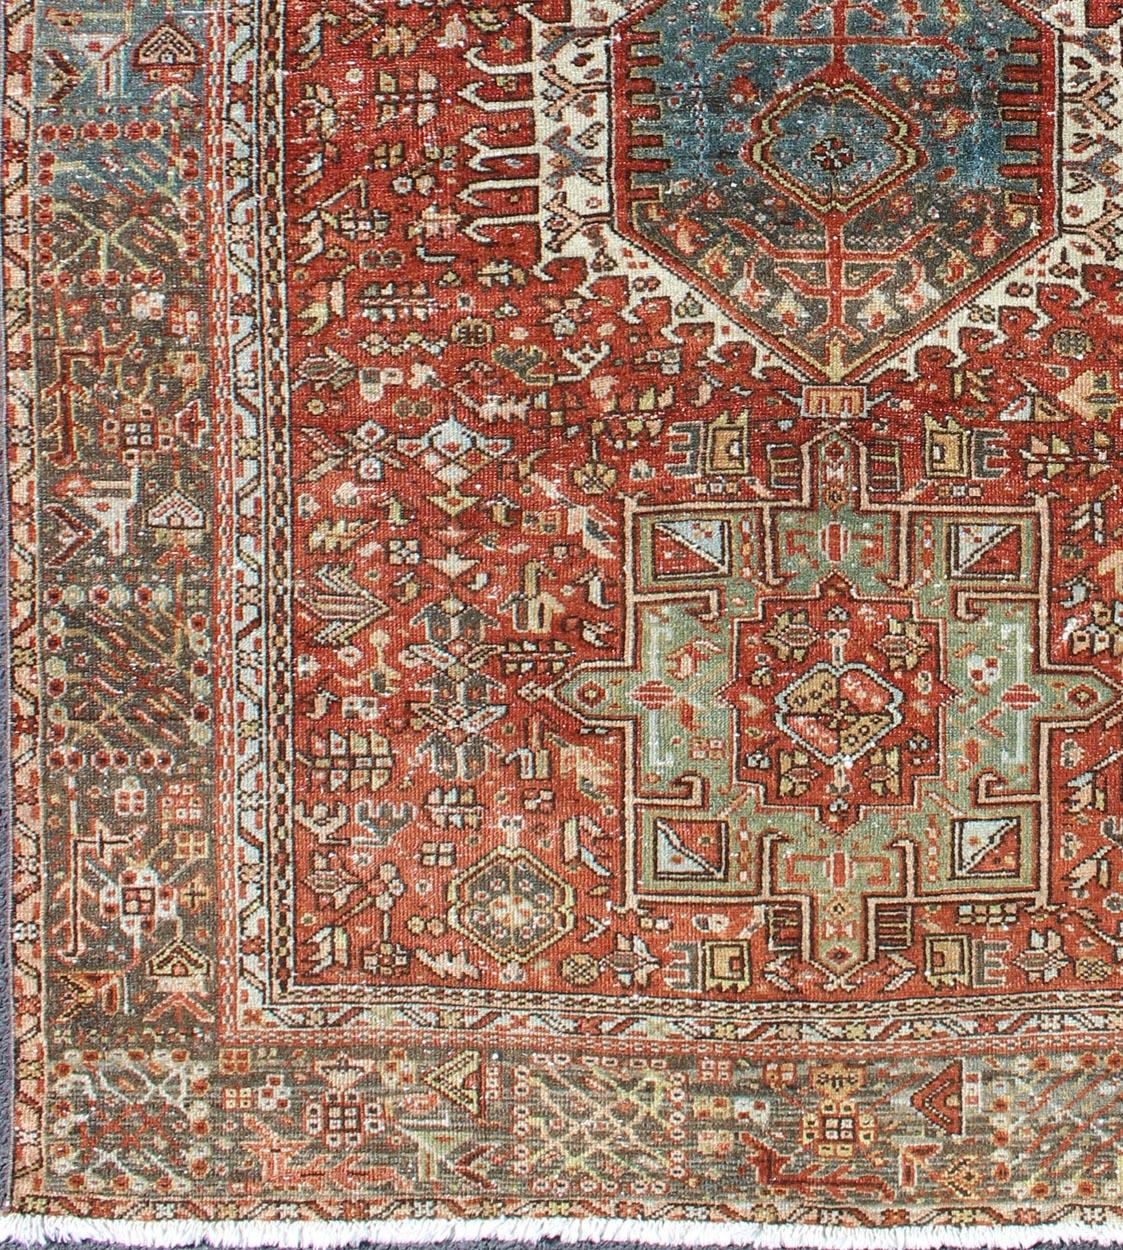 Karadjeh rug vintage Persian with Ornate and Intricate design of Medallions and geometric motifs, rug gng-4765, country of origin / type: Iran / Karadjeh, circa 1930

This early 20th century, handwoven antique Persian Karadjeh rug features a